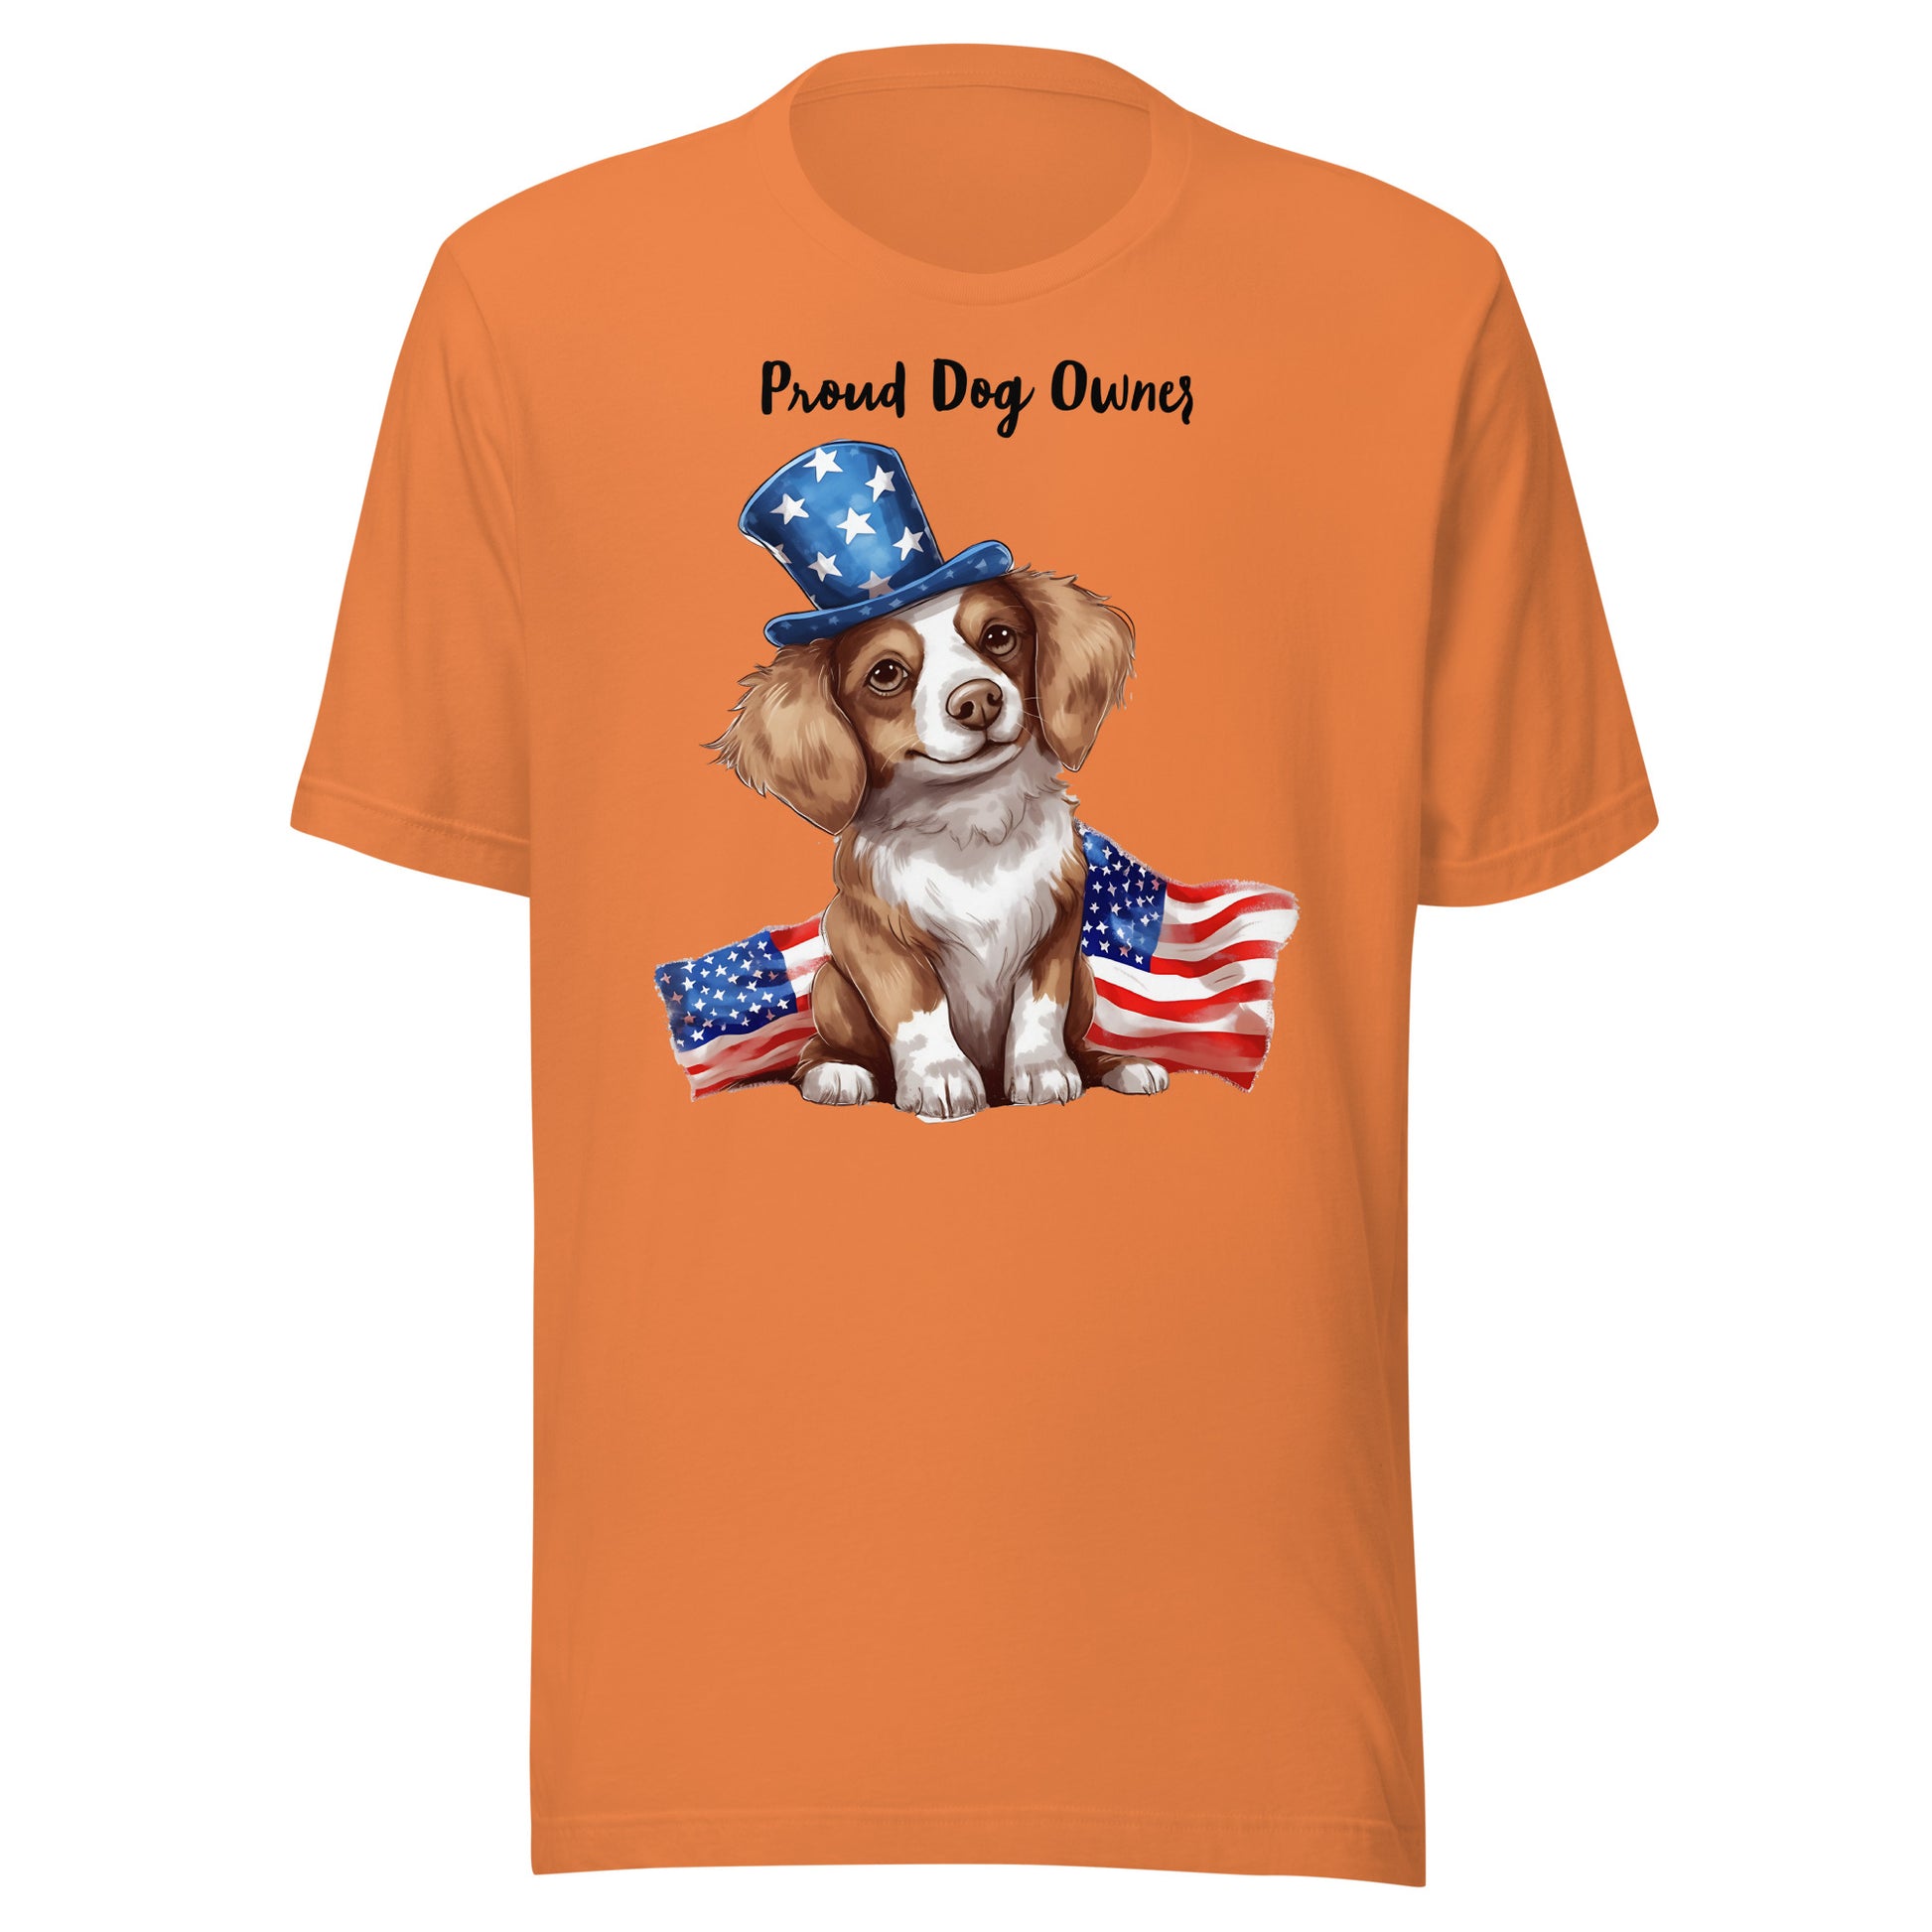 Shirt For Proud Dog Owner